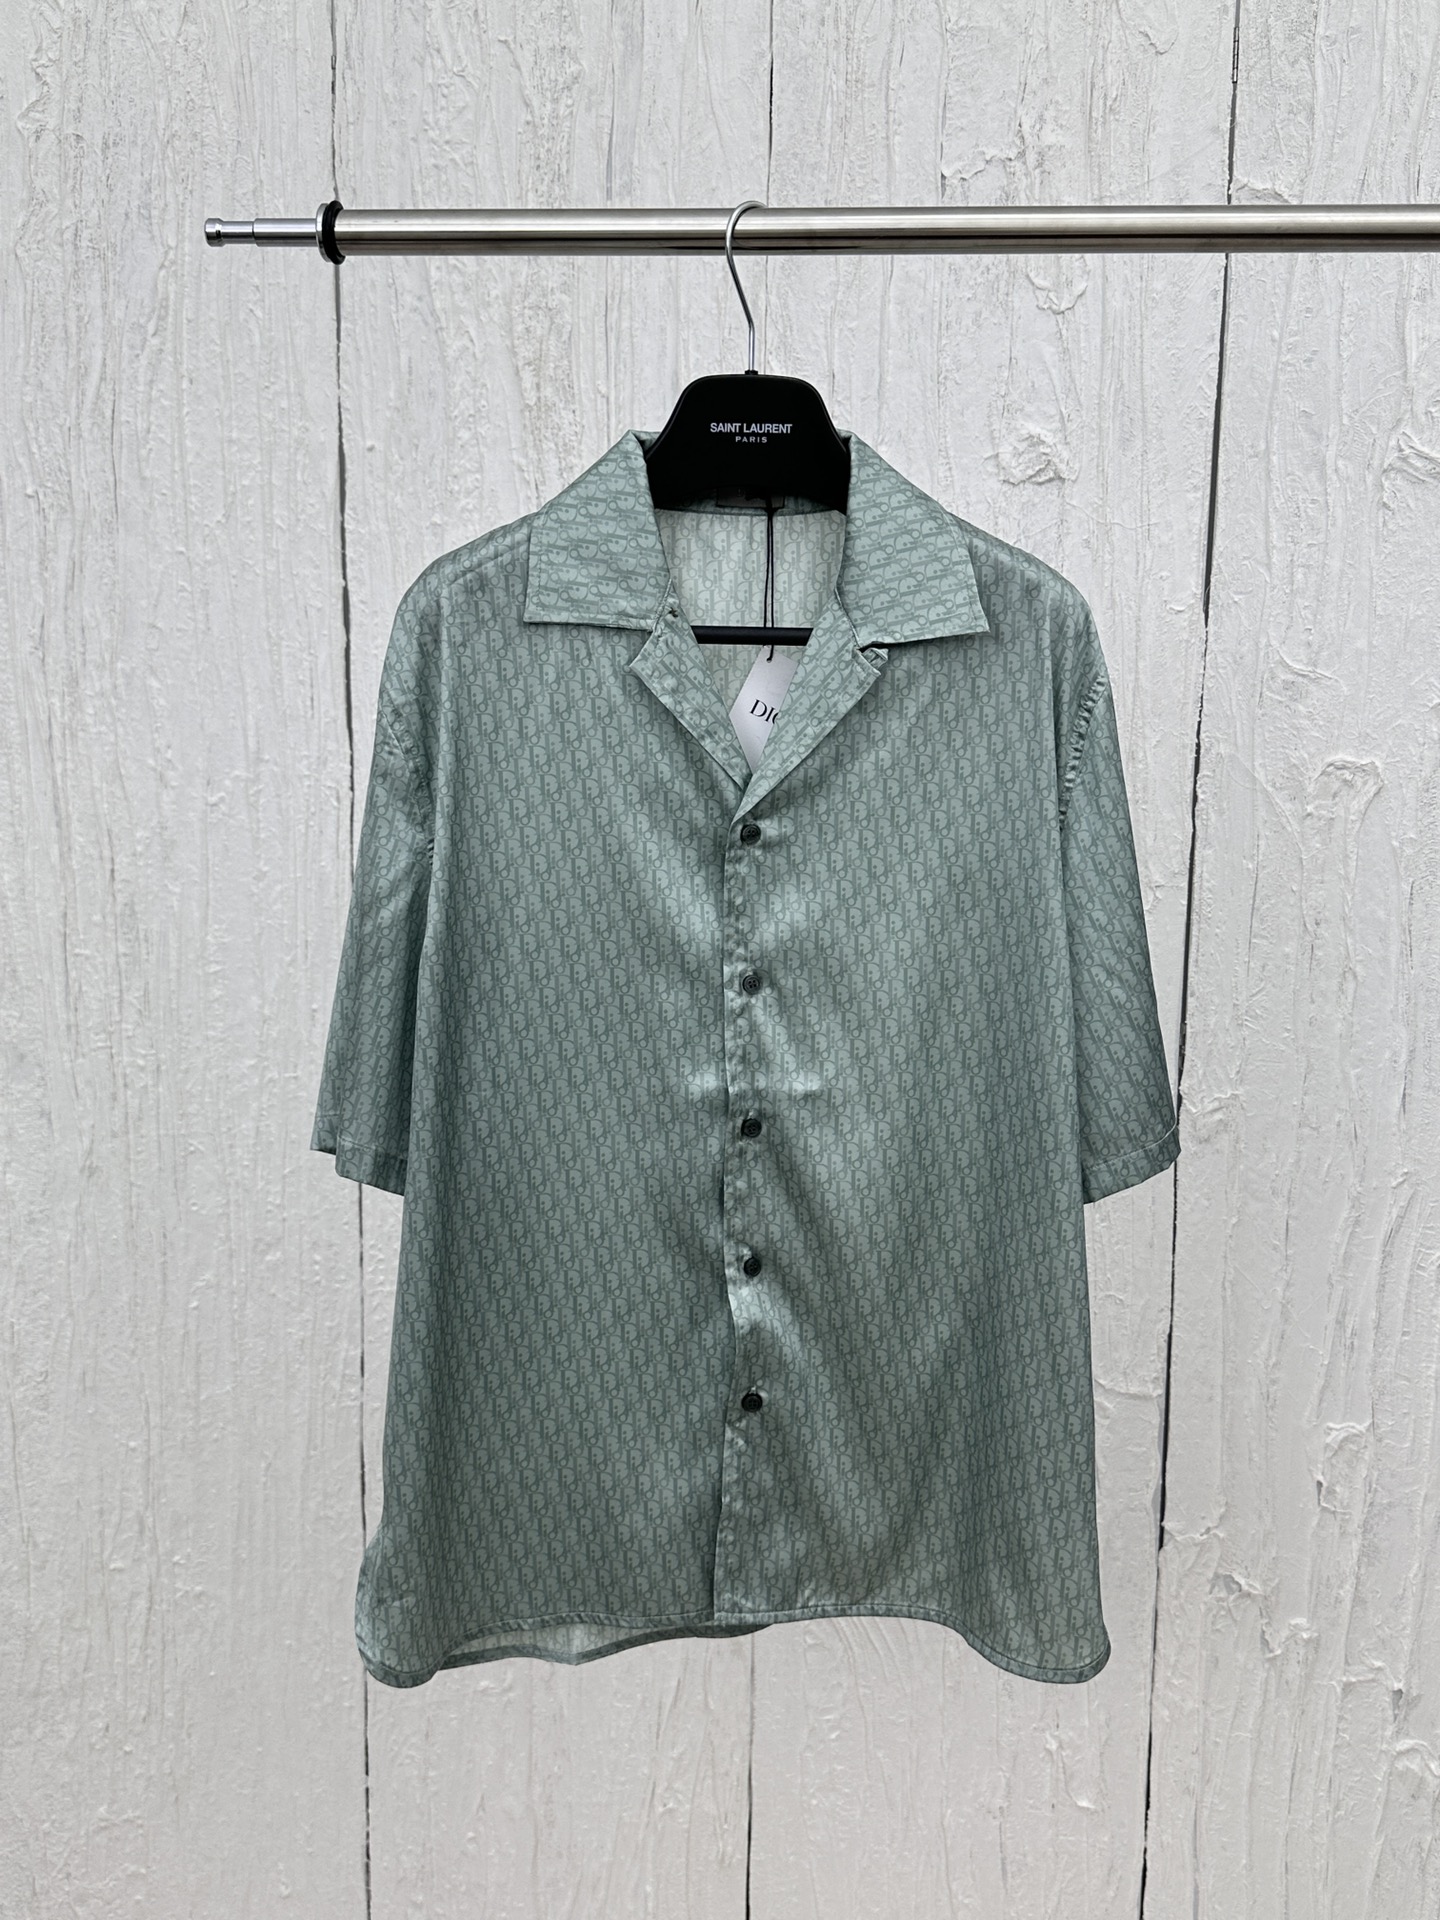 Dior Clothing Shirts & Blouses Green Printing Unisex Cotton Summer Collection Oblique Beach